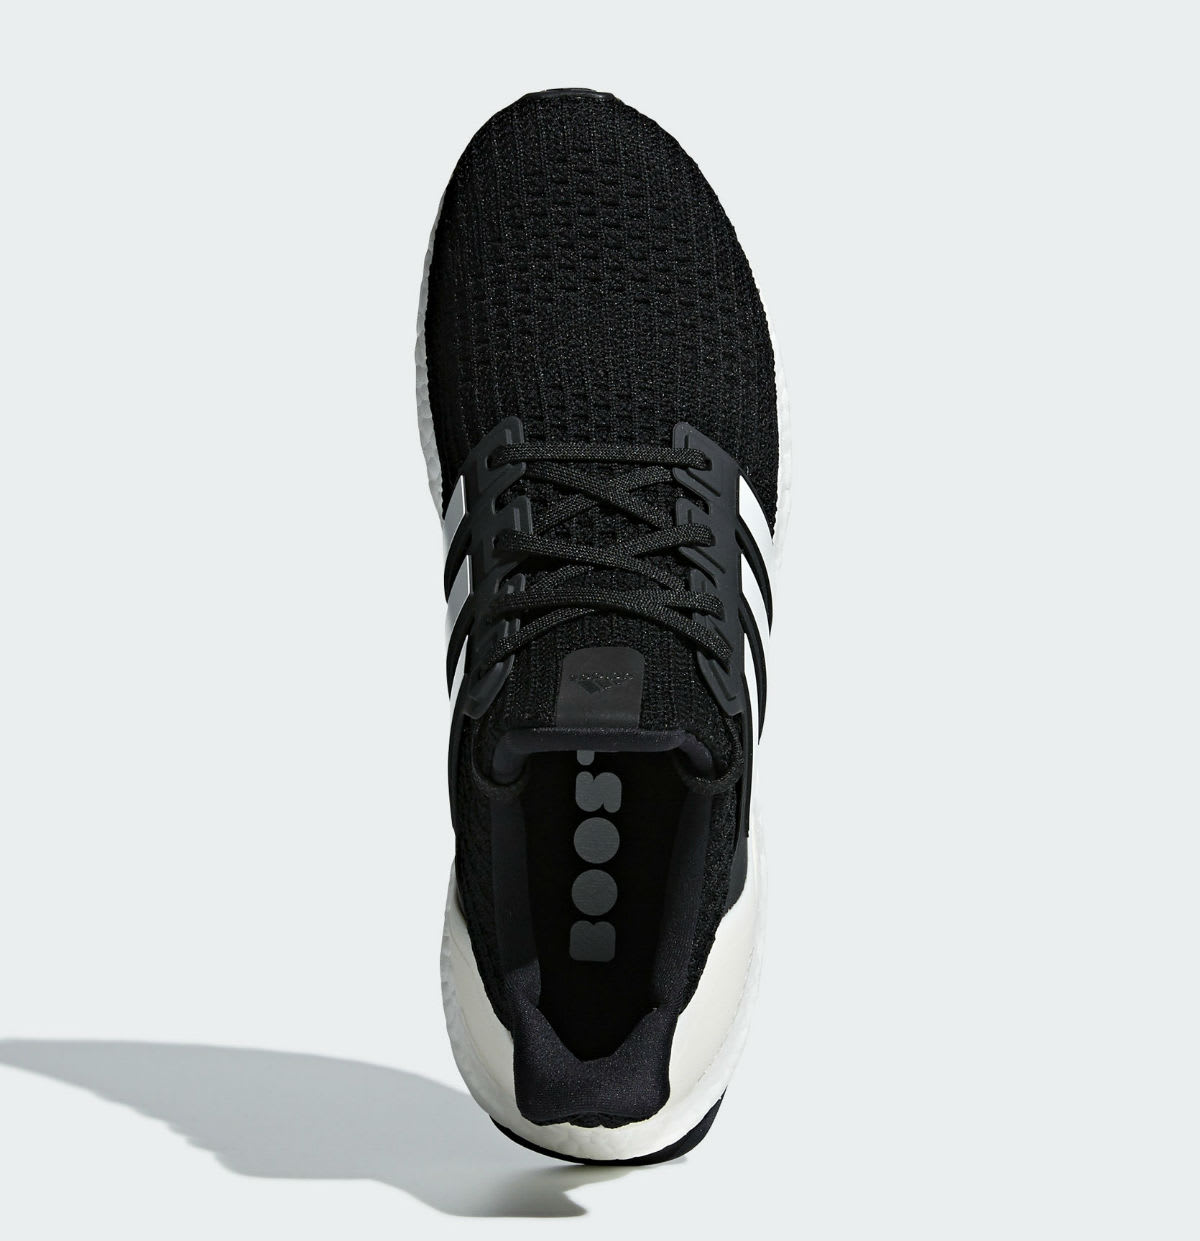 Adidas Ultra Boost 4.0 Show Your Stripes Core Black Cloud White Carbon Release date AQ0062 Top